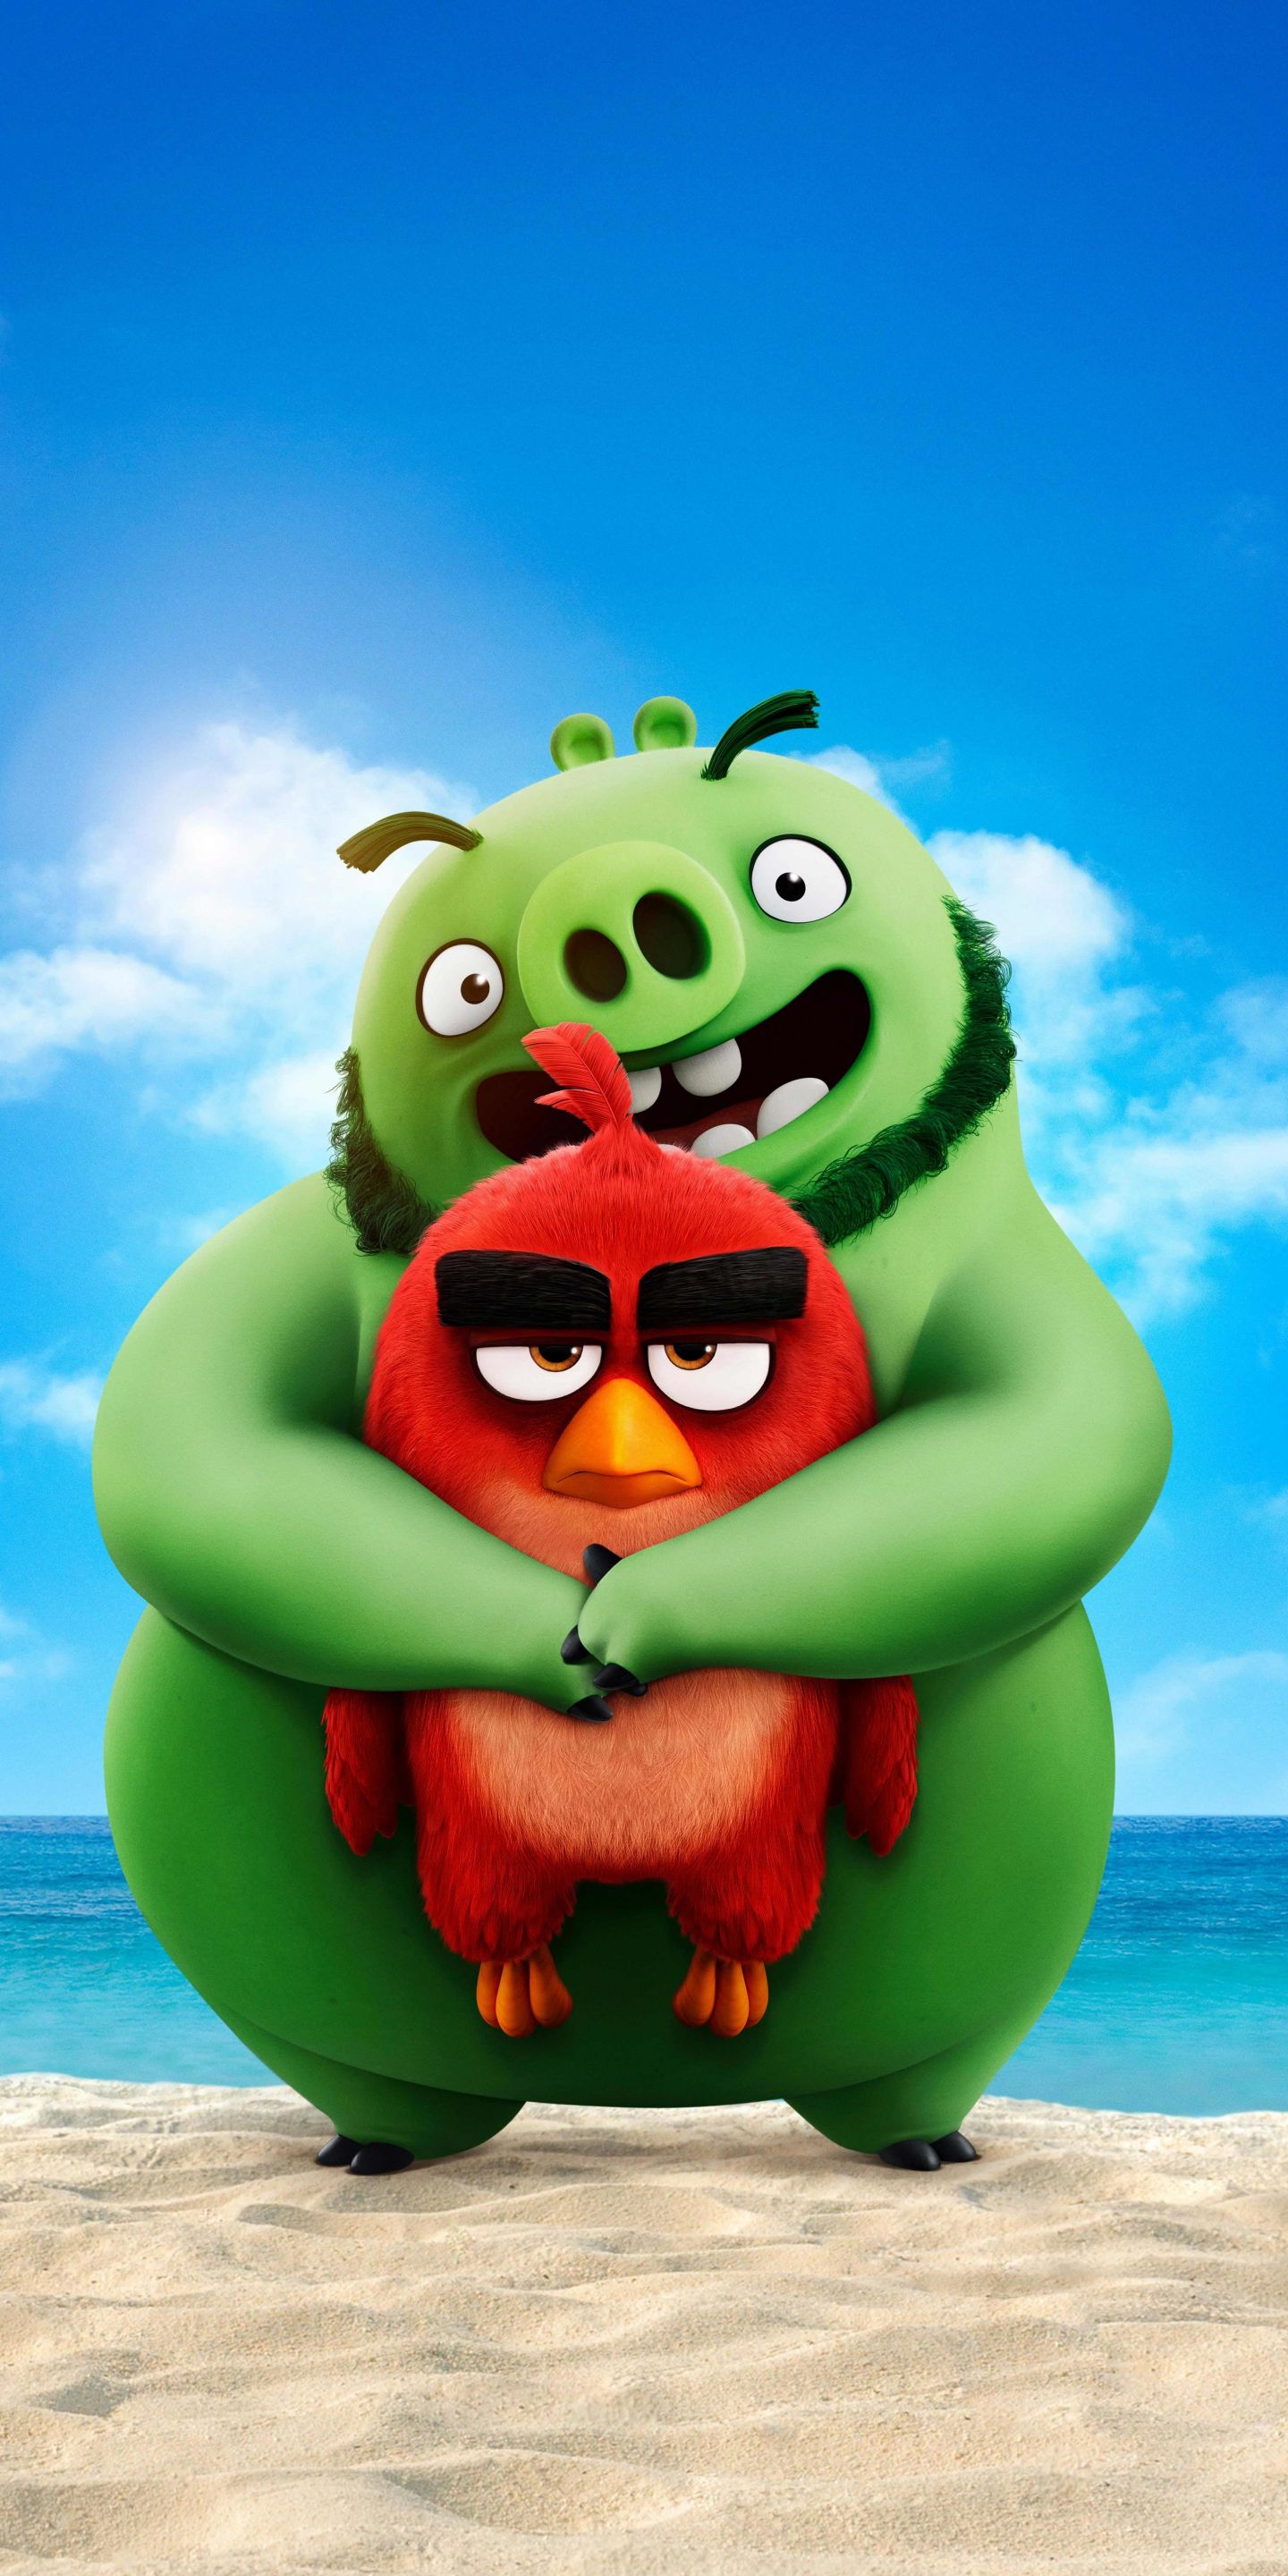 Angry birds wallpaper: Angry Birds 2 Game Wallpaper